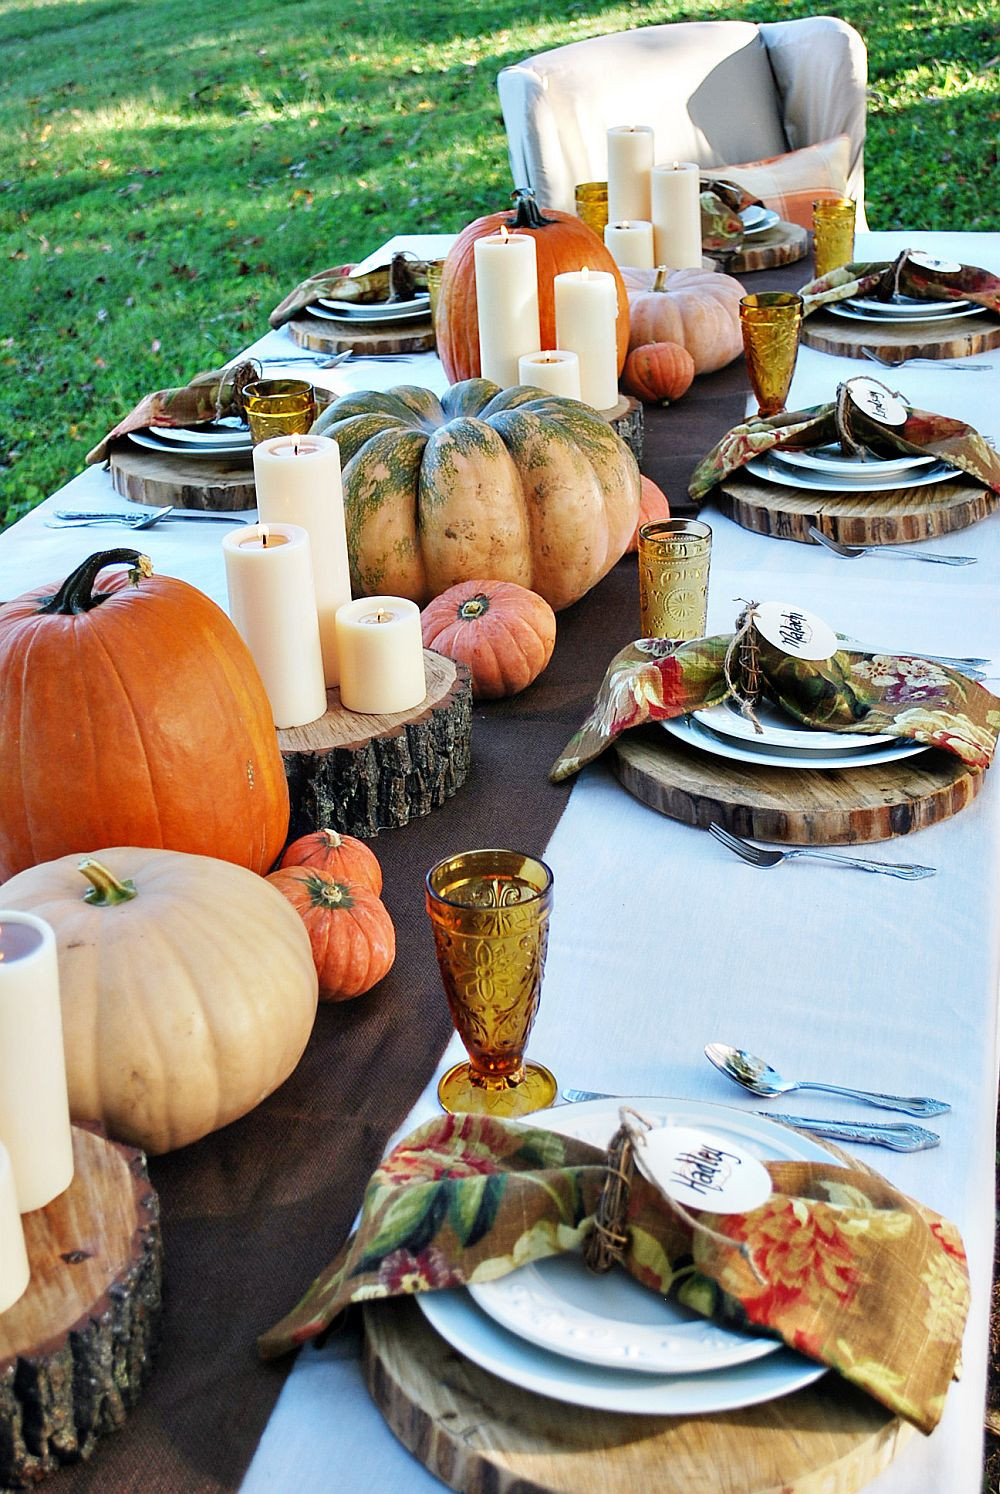 Thanksgiving Dinner Table Decorations
 15 Outdoor Thanksgiving Table Settings for Dining Alfresco